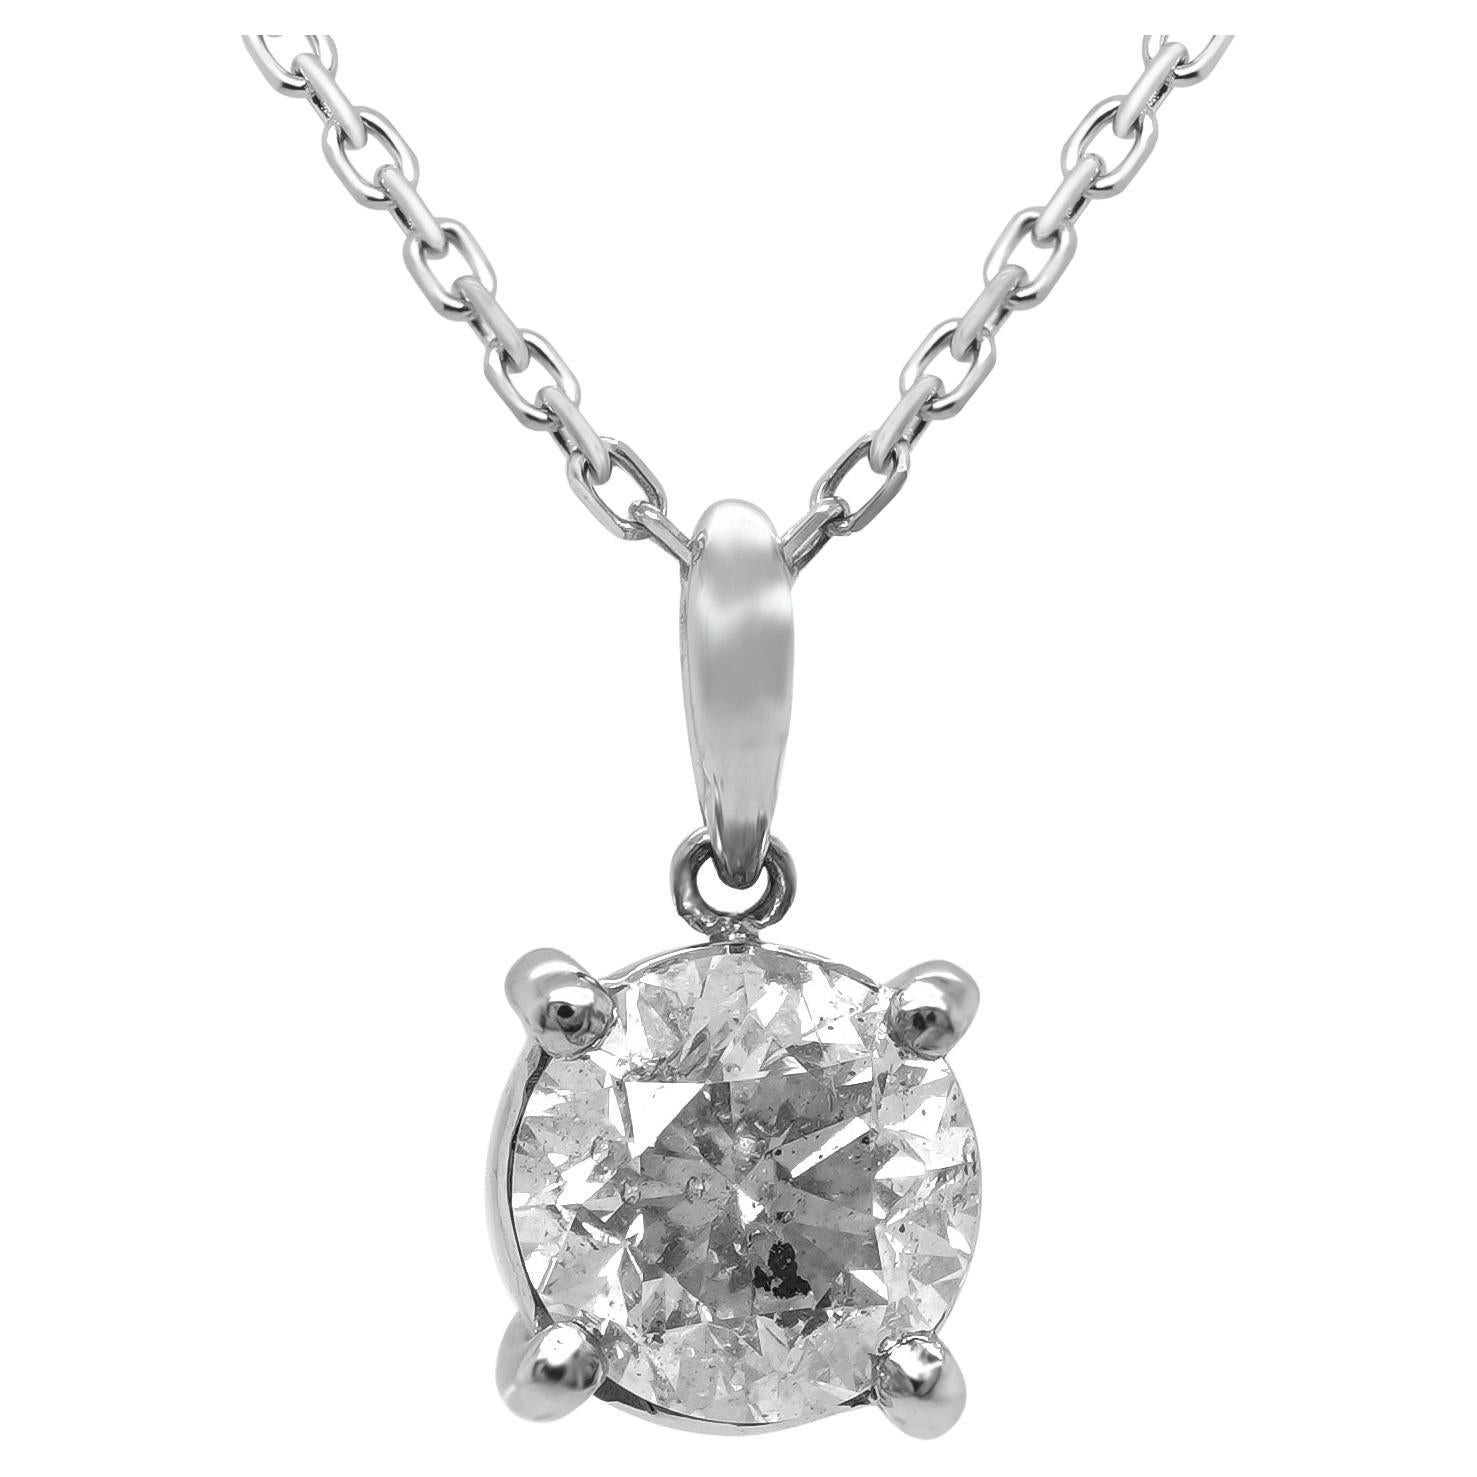 Certified F Color Solitaire Necklace PT 900 Everyday Reasonable Jewelry